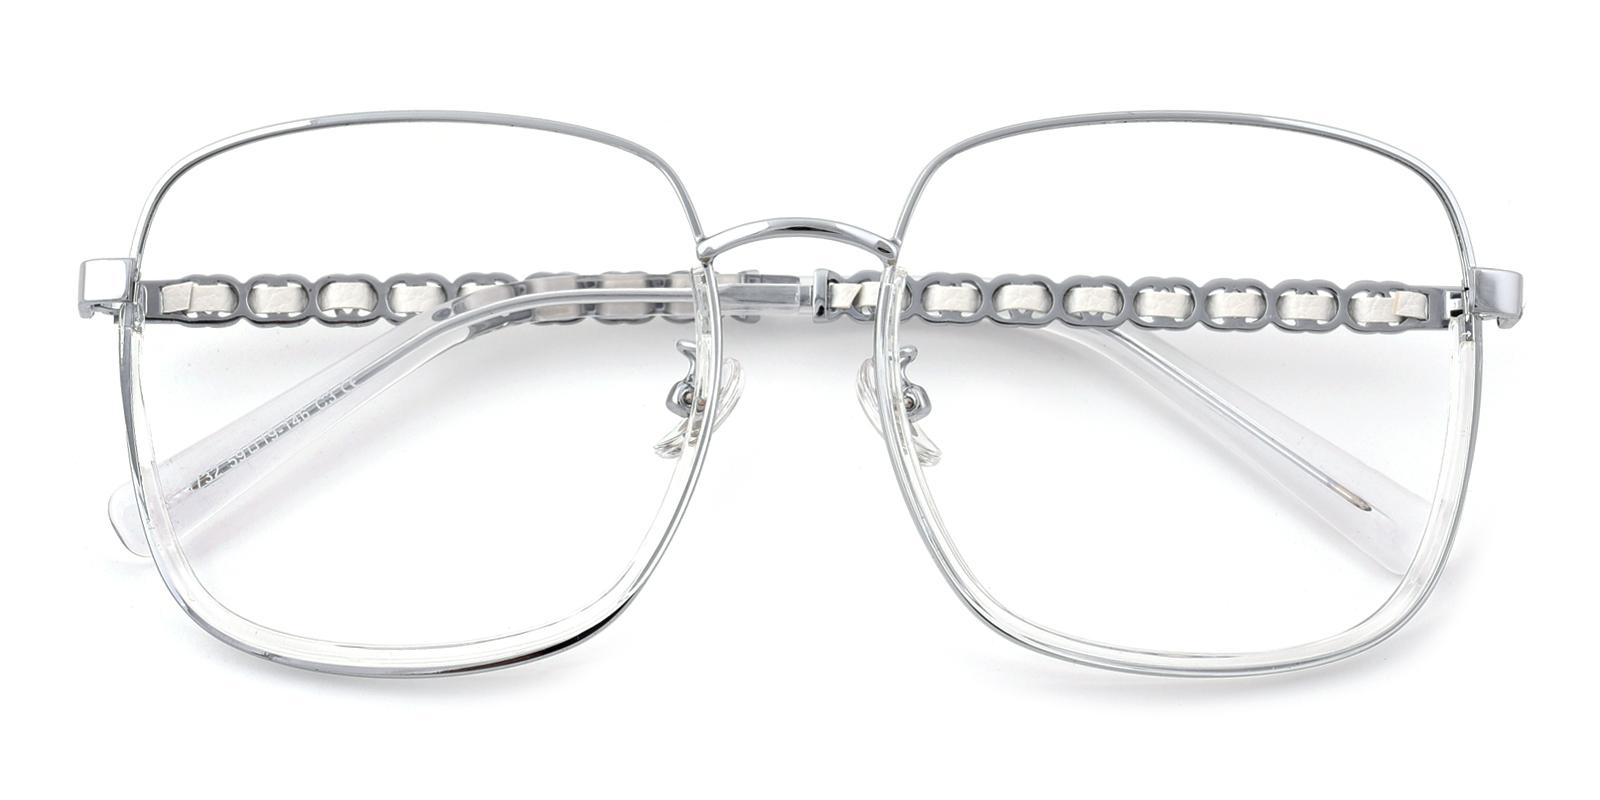 Clover-Silver-Square-Combination-Eyeglasses-detail